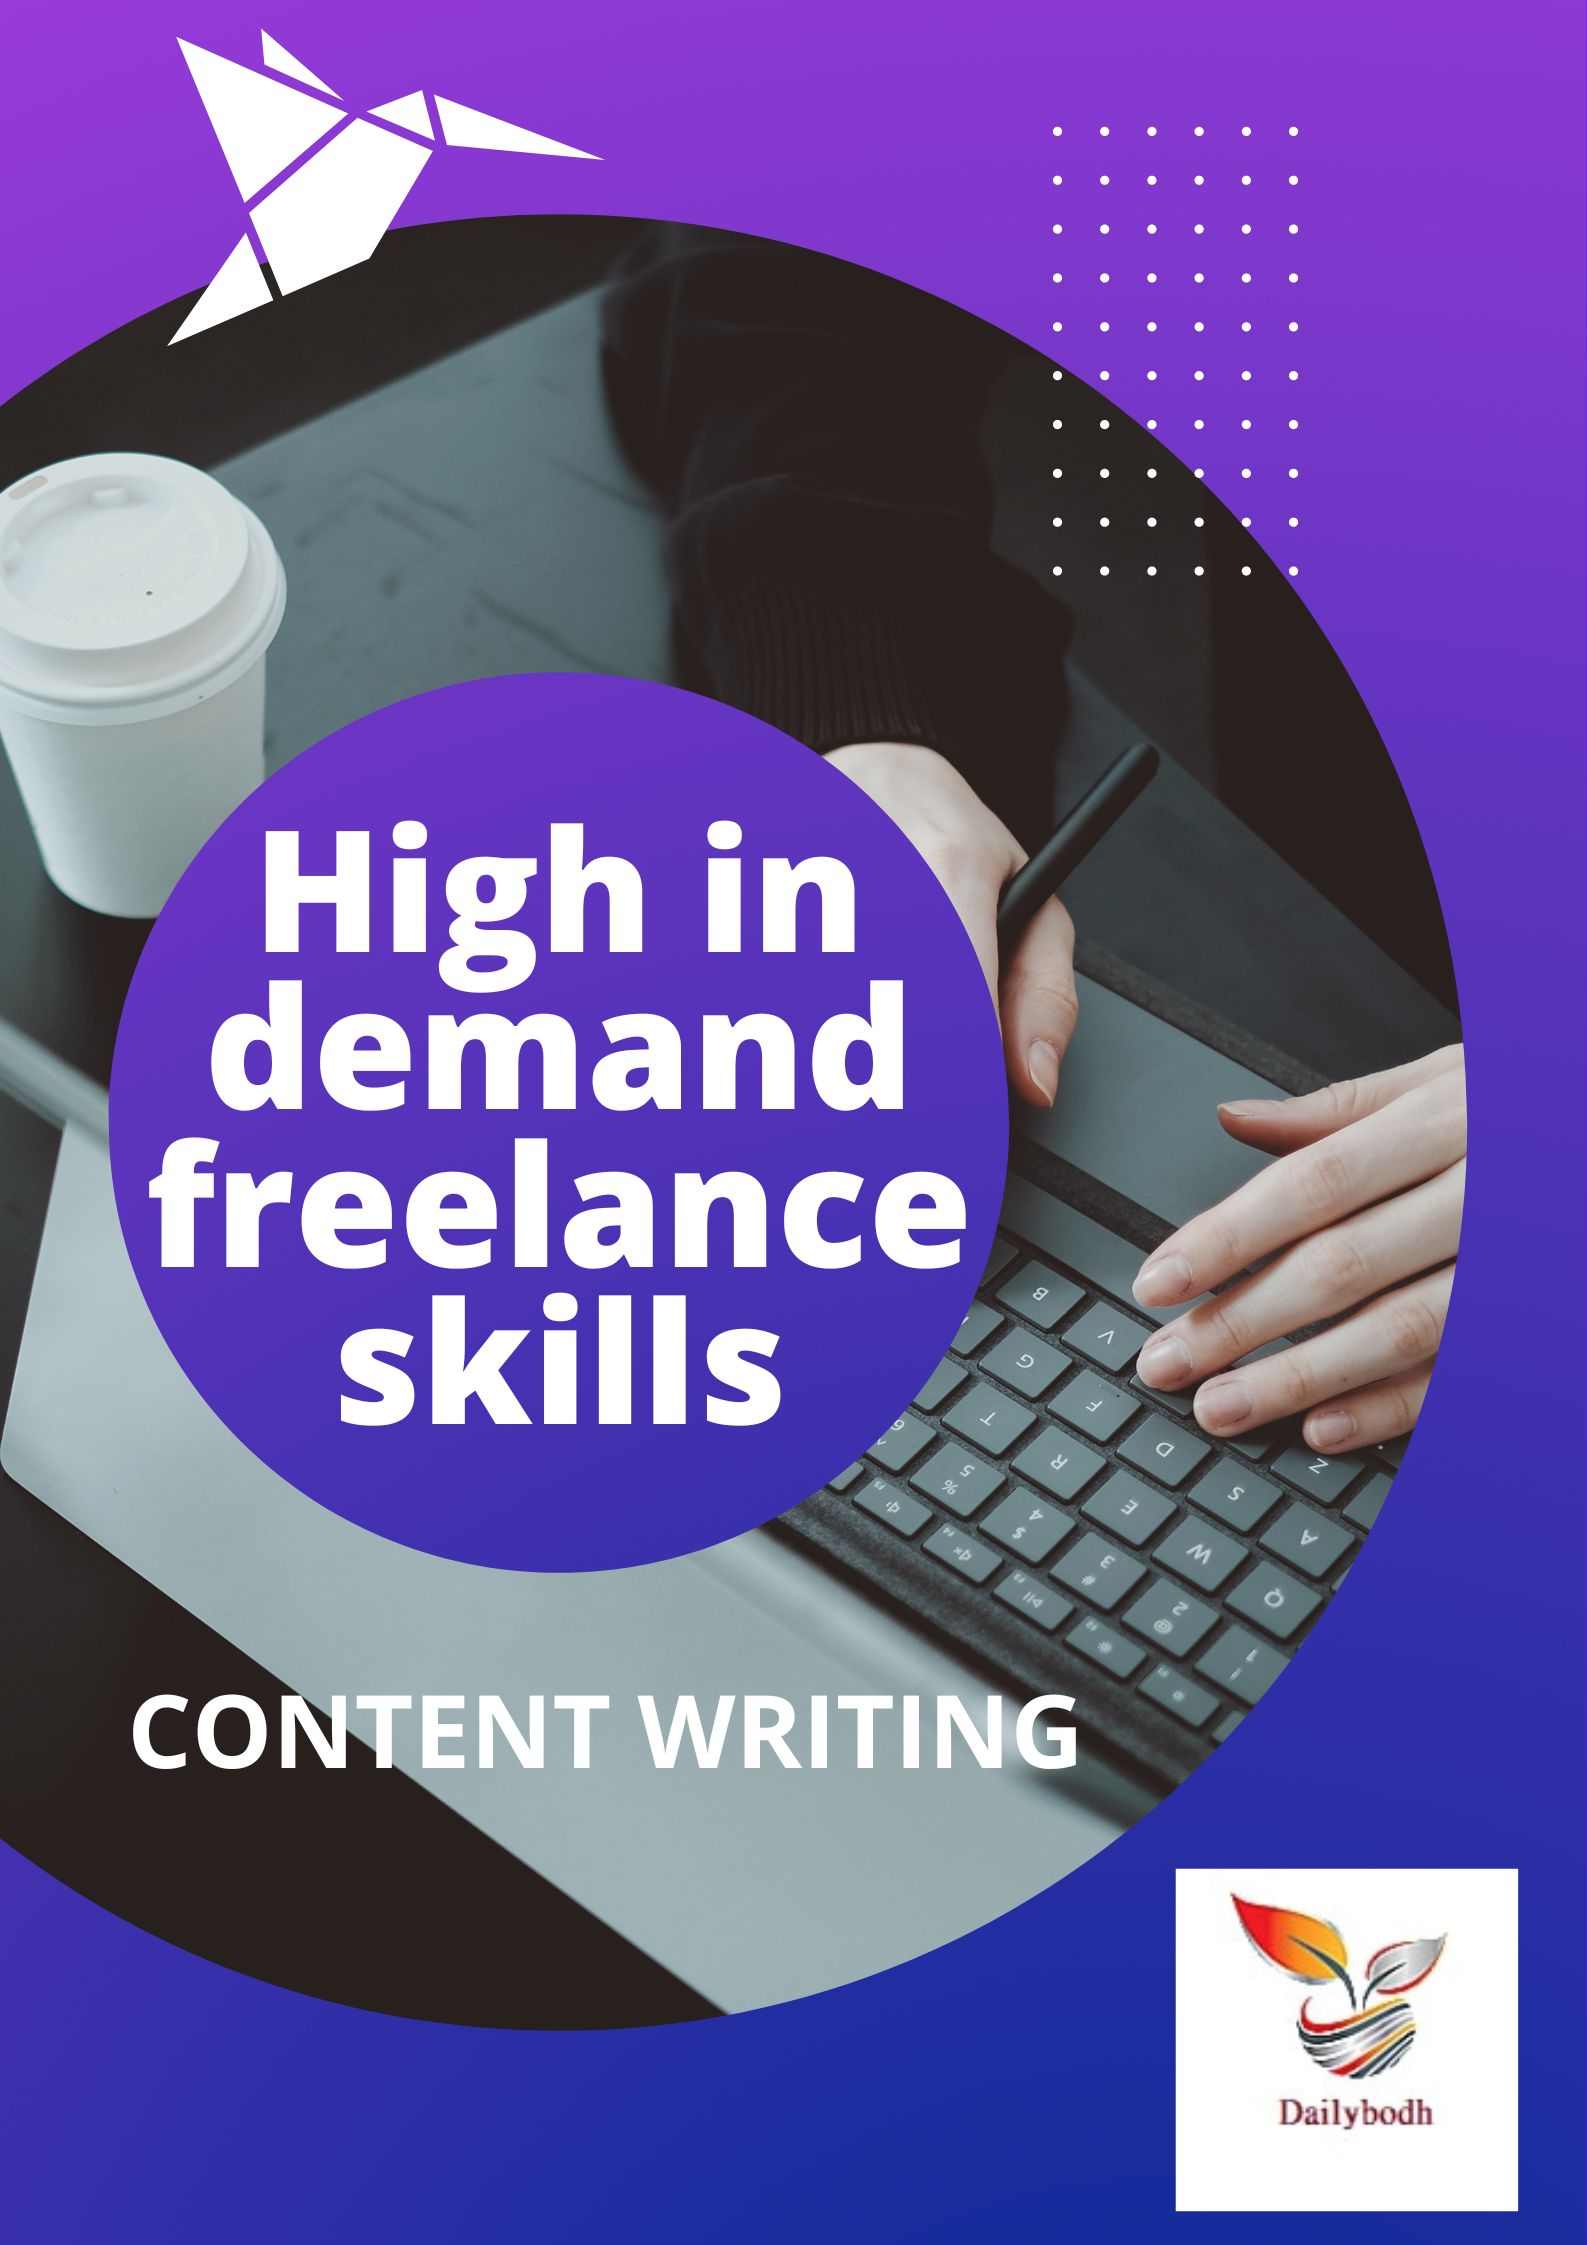 Content Writing(High in demand freelance skills)